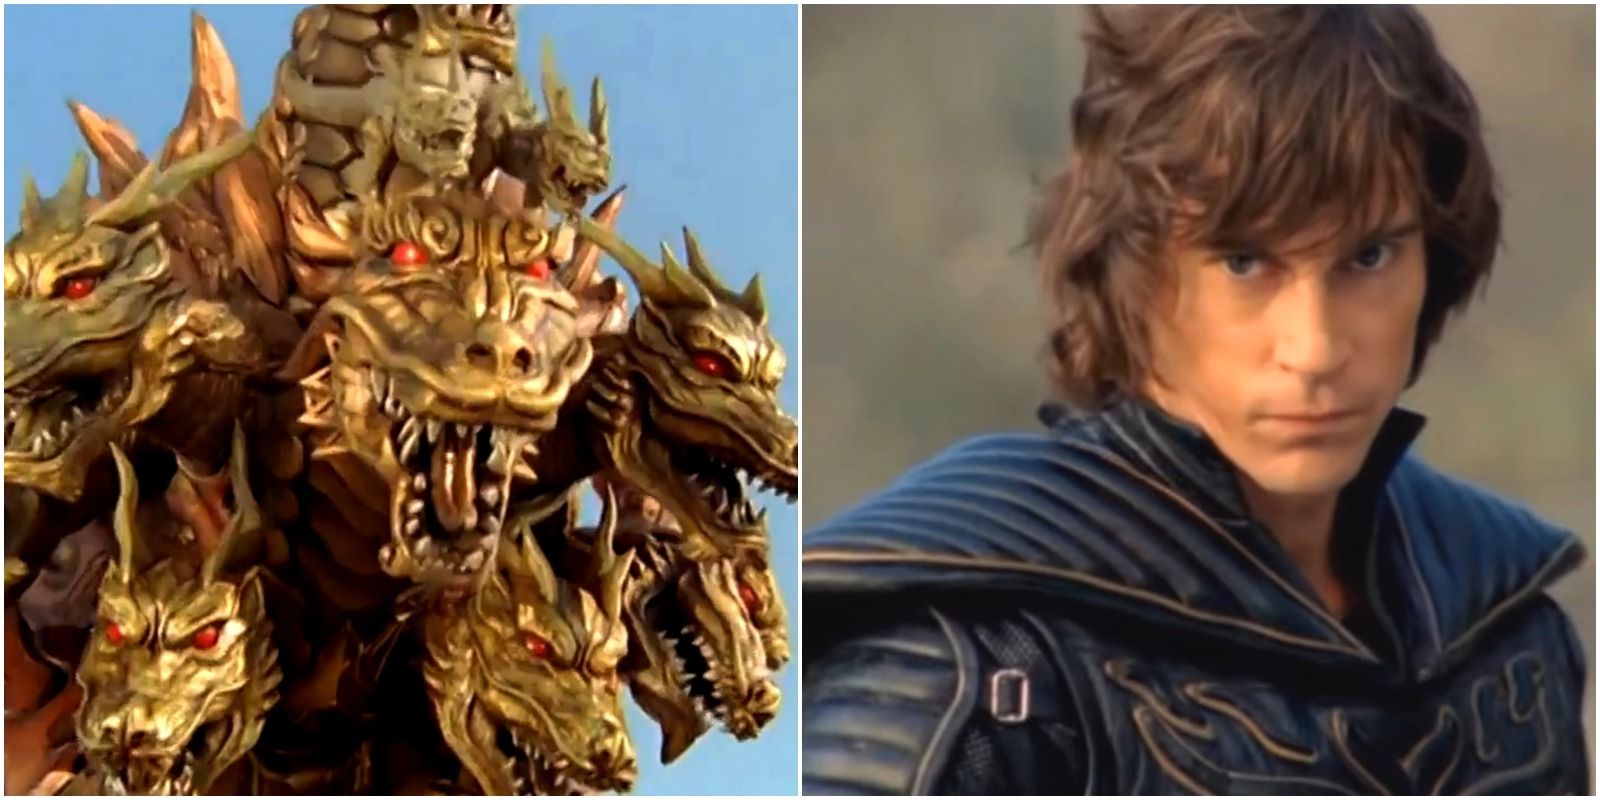 Dai Shi's incarnate and Jarrod, his human vessel, from Power Rangers Jungle Fury